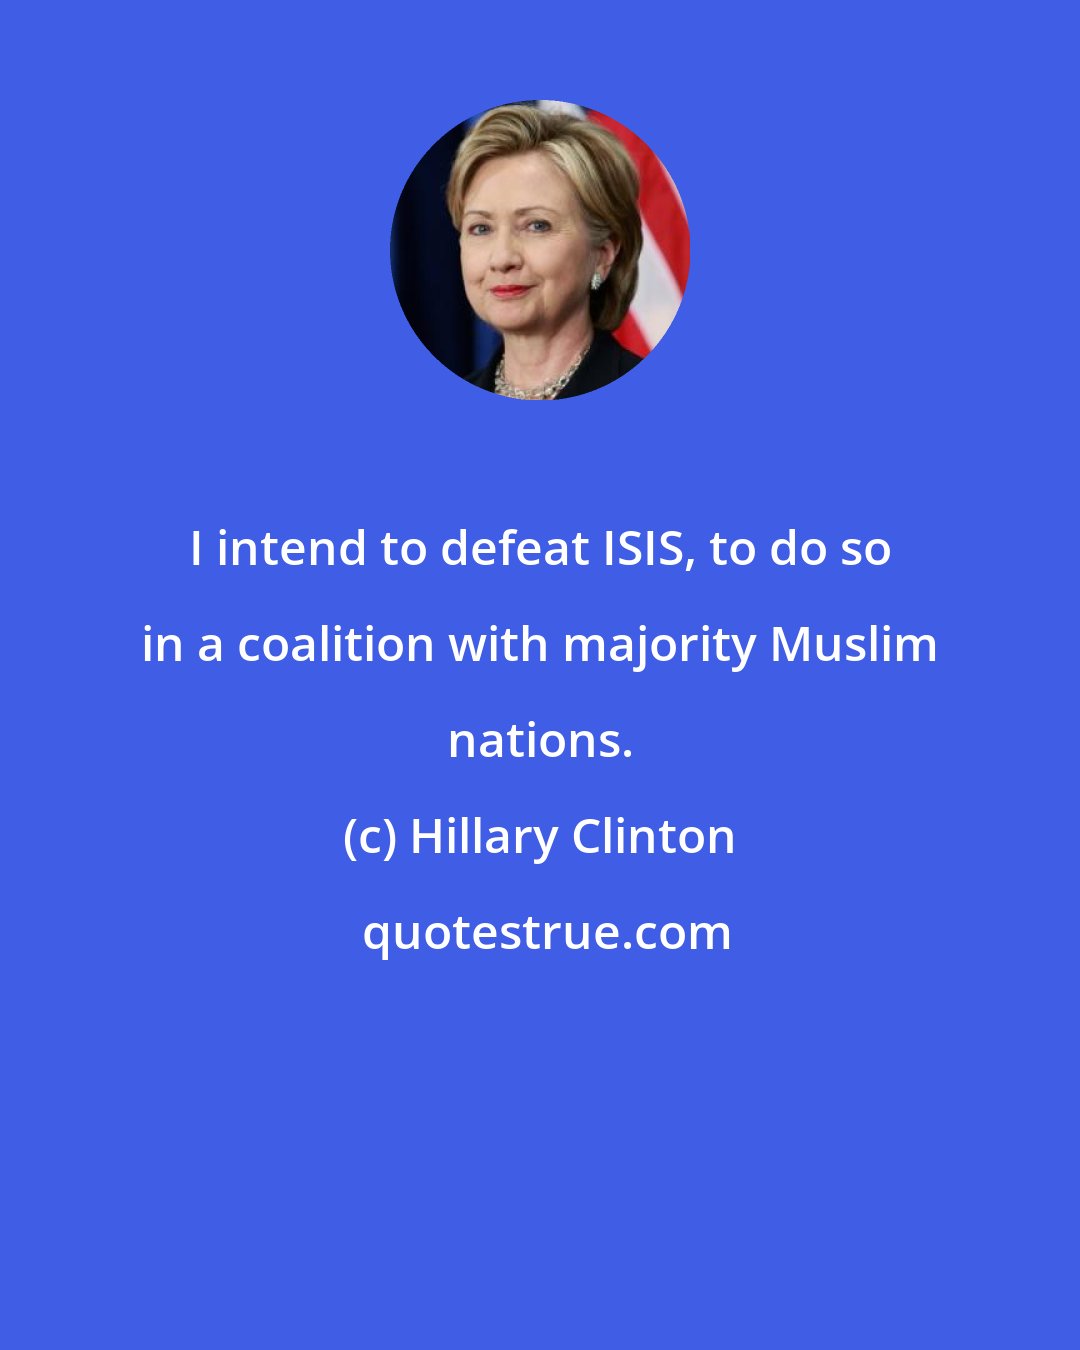 Hillary Clinton: I intend to defeat ISIS, to do so in a coalition with majority Muslim nations.